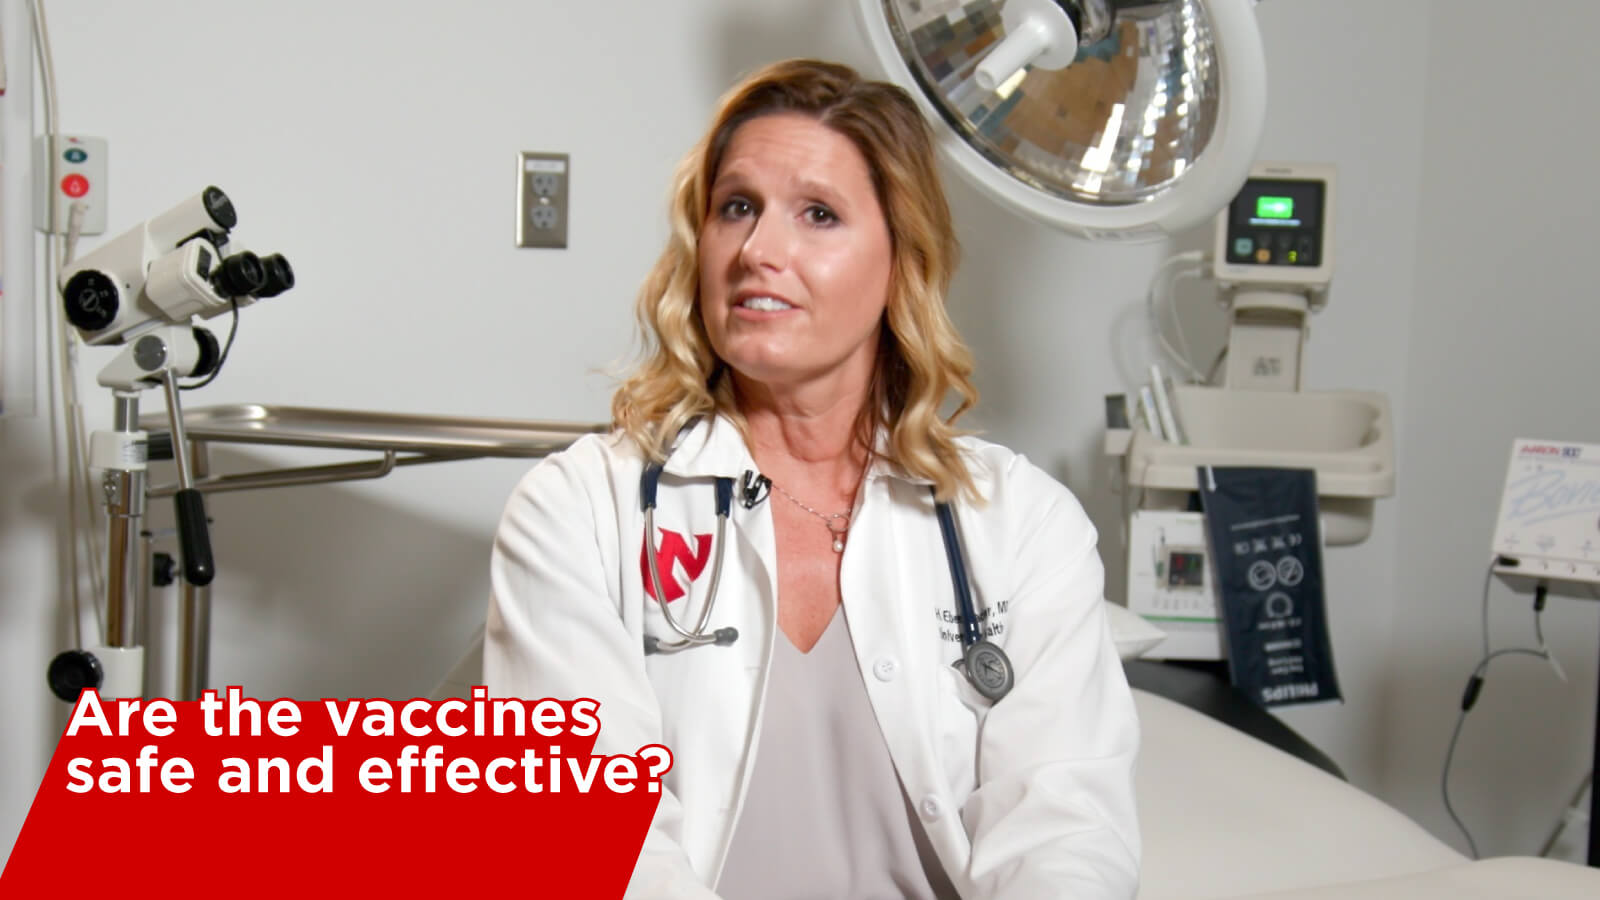 Dr. Eberspacher answers questions about the COVID-19 vaccines on the university website.